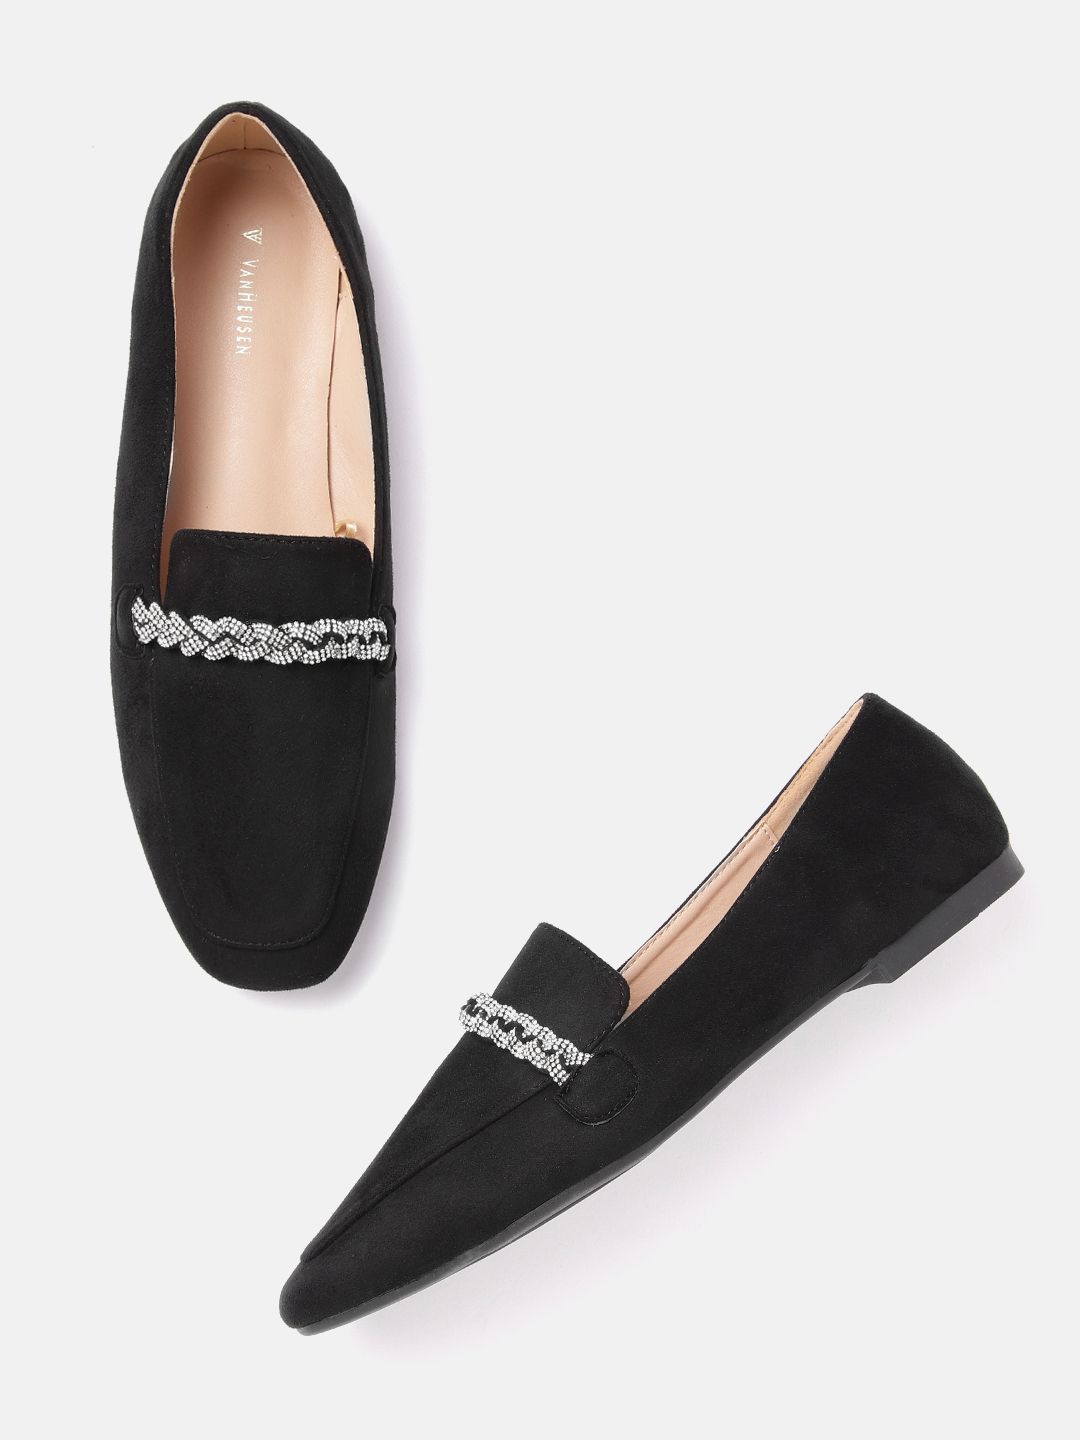 Van Heusen Woman Stone Embellished Chain Loafers Price in India